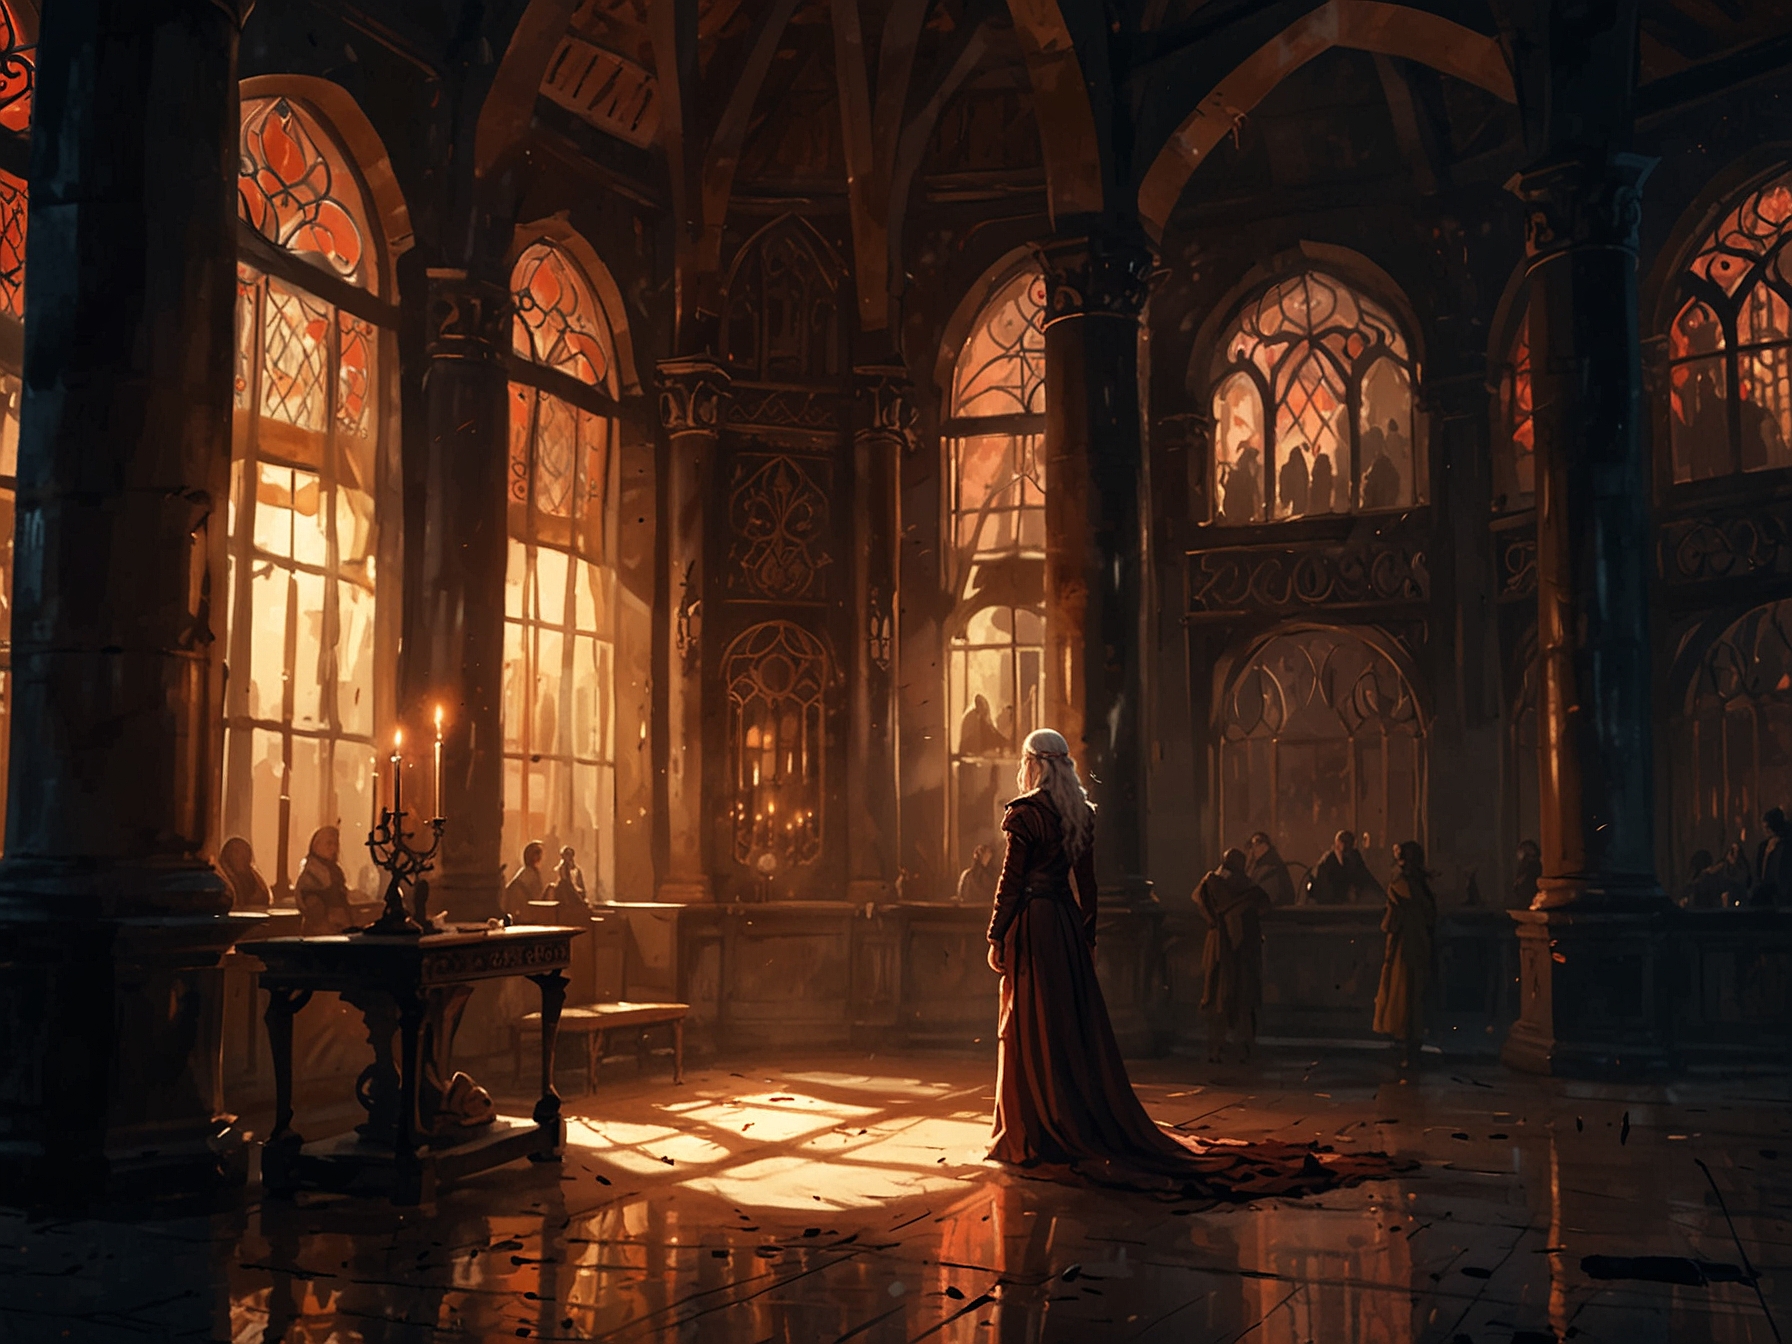 An enthralling scene depicting the power struggle between Rhaenyra Targaryen and Alicent Hightower in the richly decorated chambers of King's Landing, reflecting their ambition.